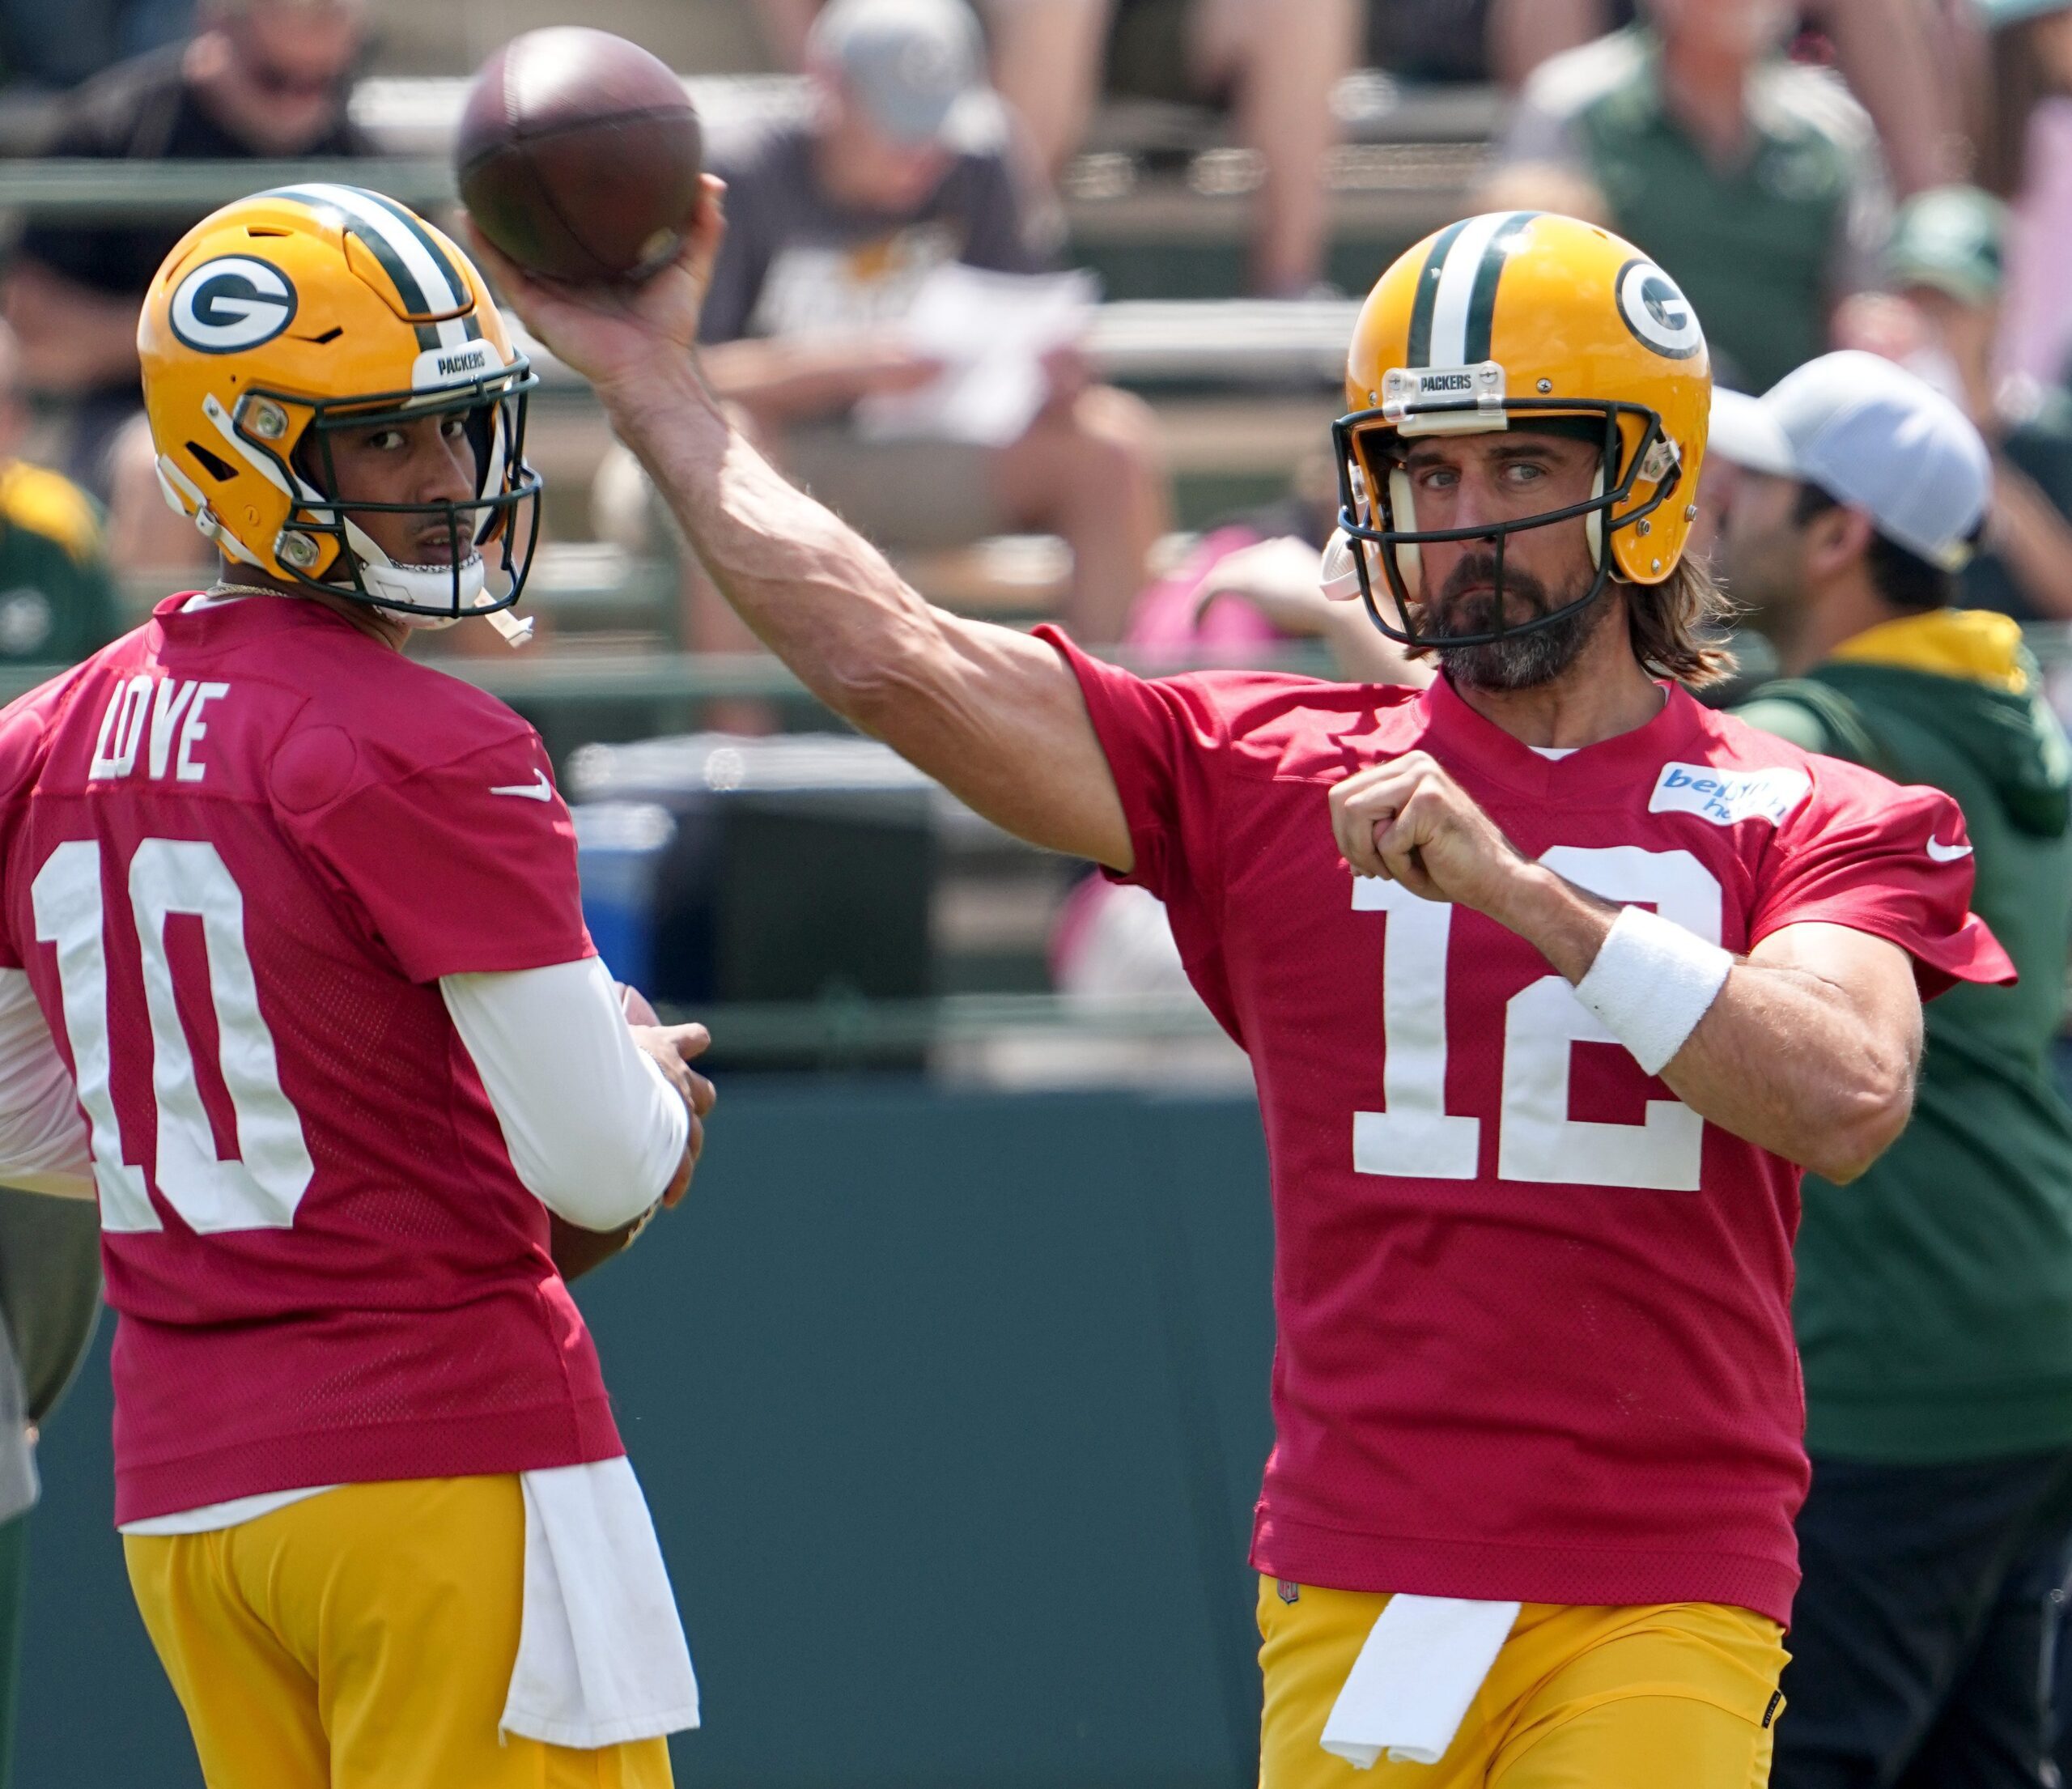 The Packers backup QB has the most potential of any backup